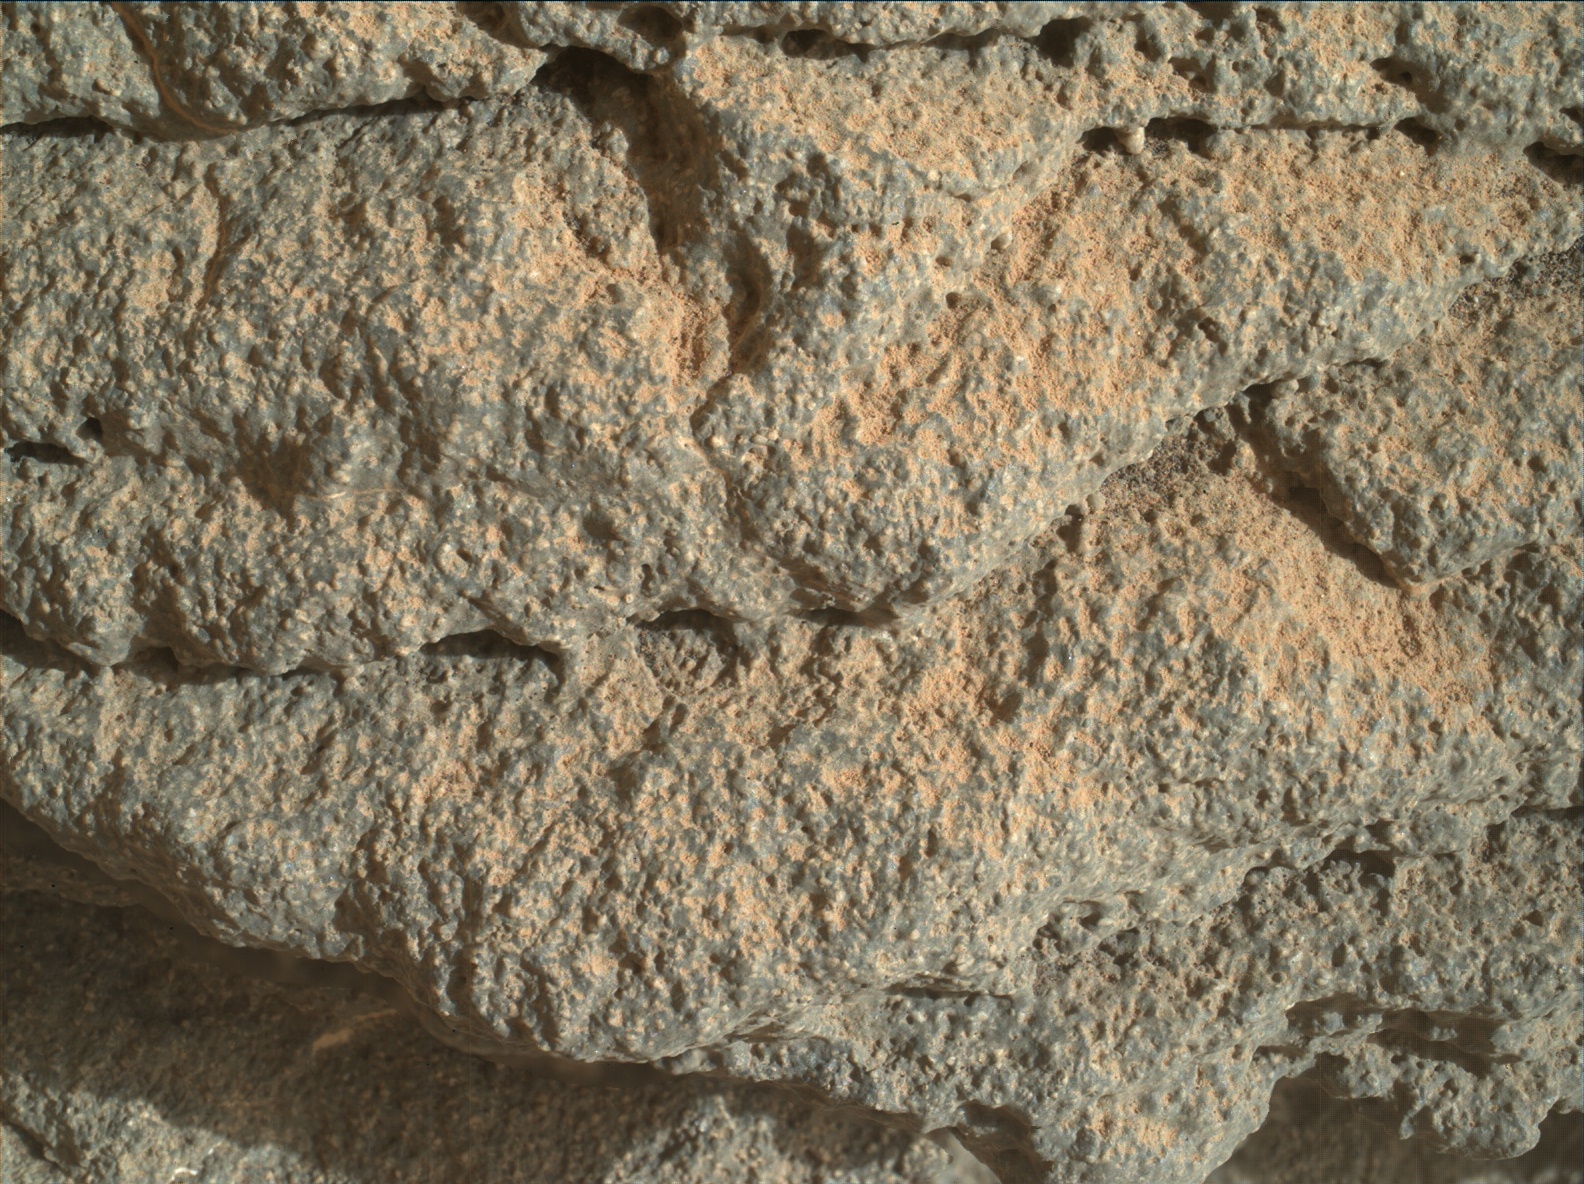 Nasa's Mars rover Curiosity acquired this image using its Mars Hand Lens Imager (MAHLI) on Sol 842